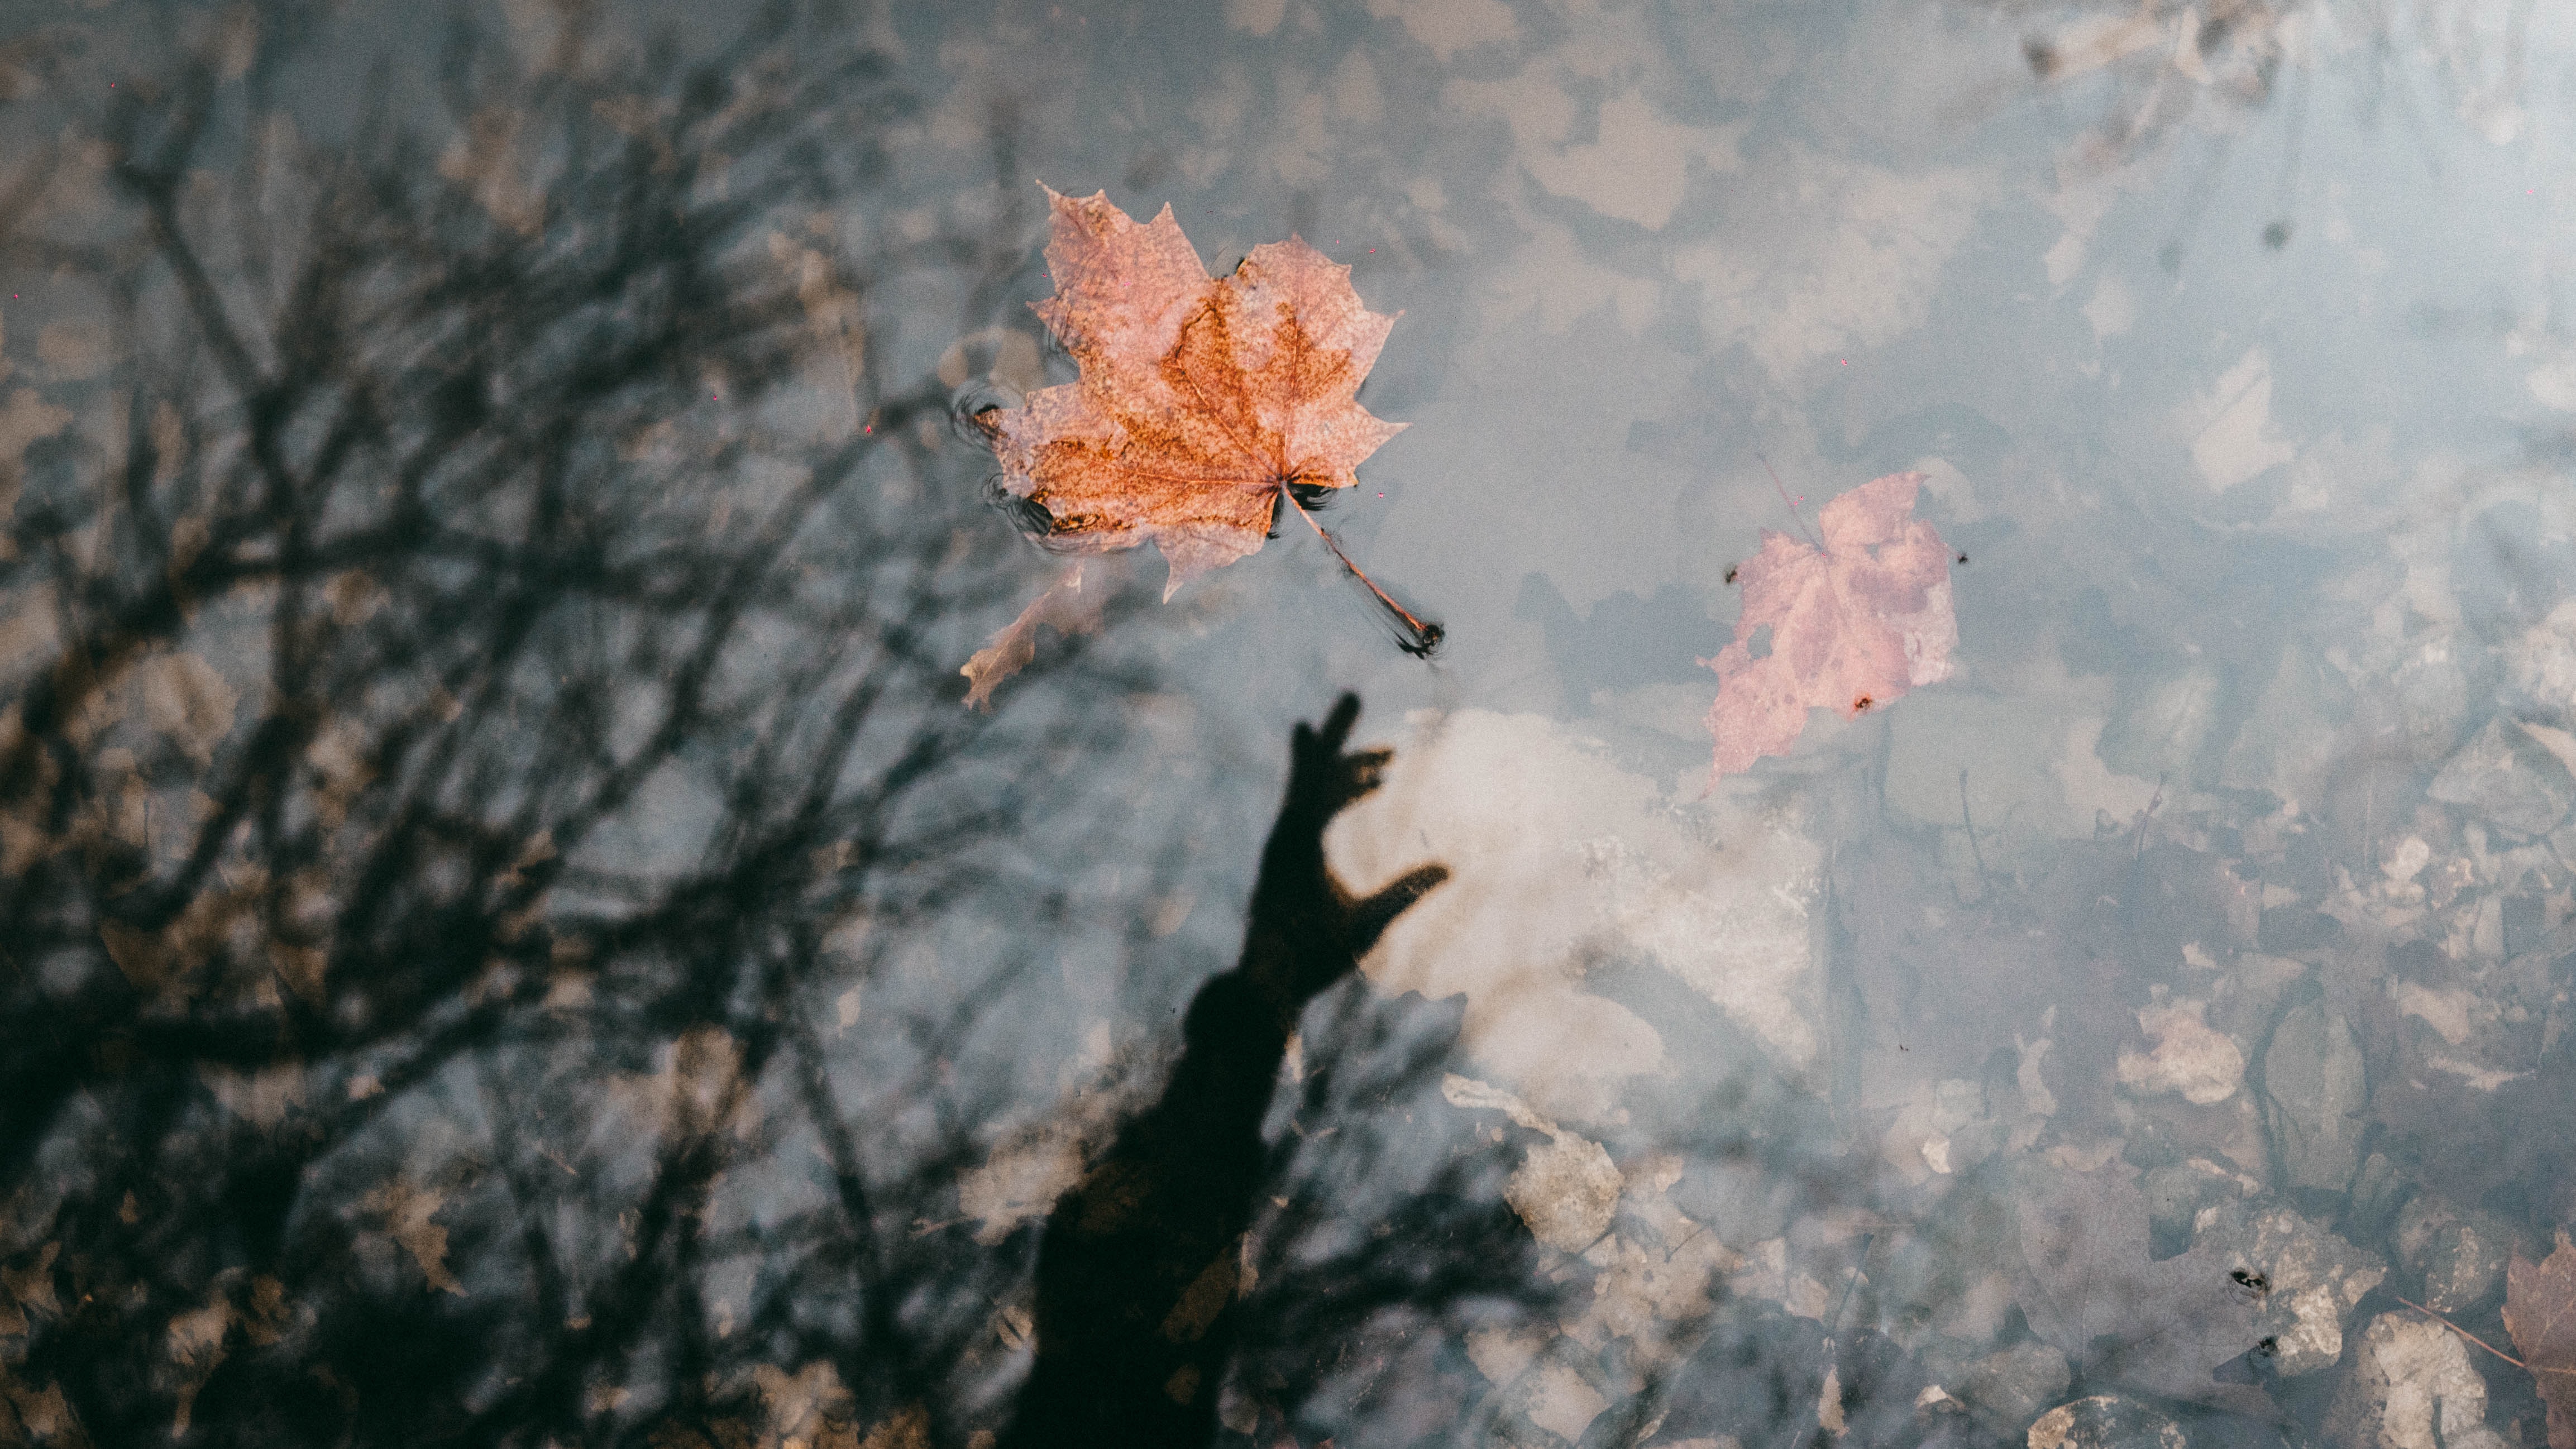 A rust-colored leaf floats on the surface of a pond, and under the surface of the water there are stones and rocks. The surface of the water reflects the hand that dropped the leaf onto the water.